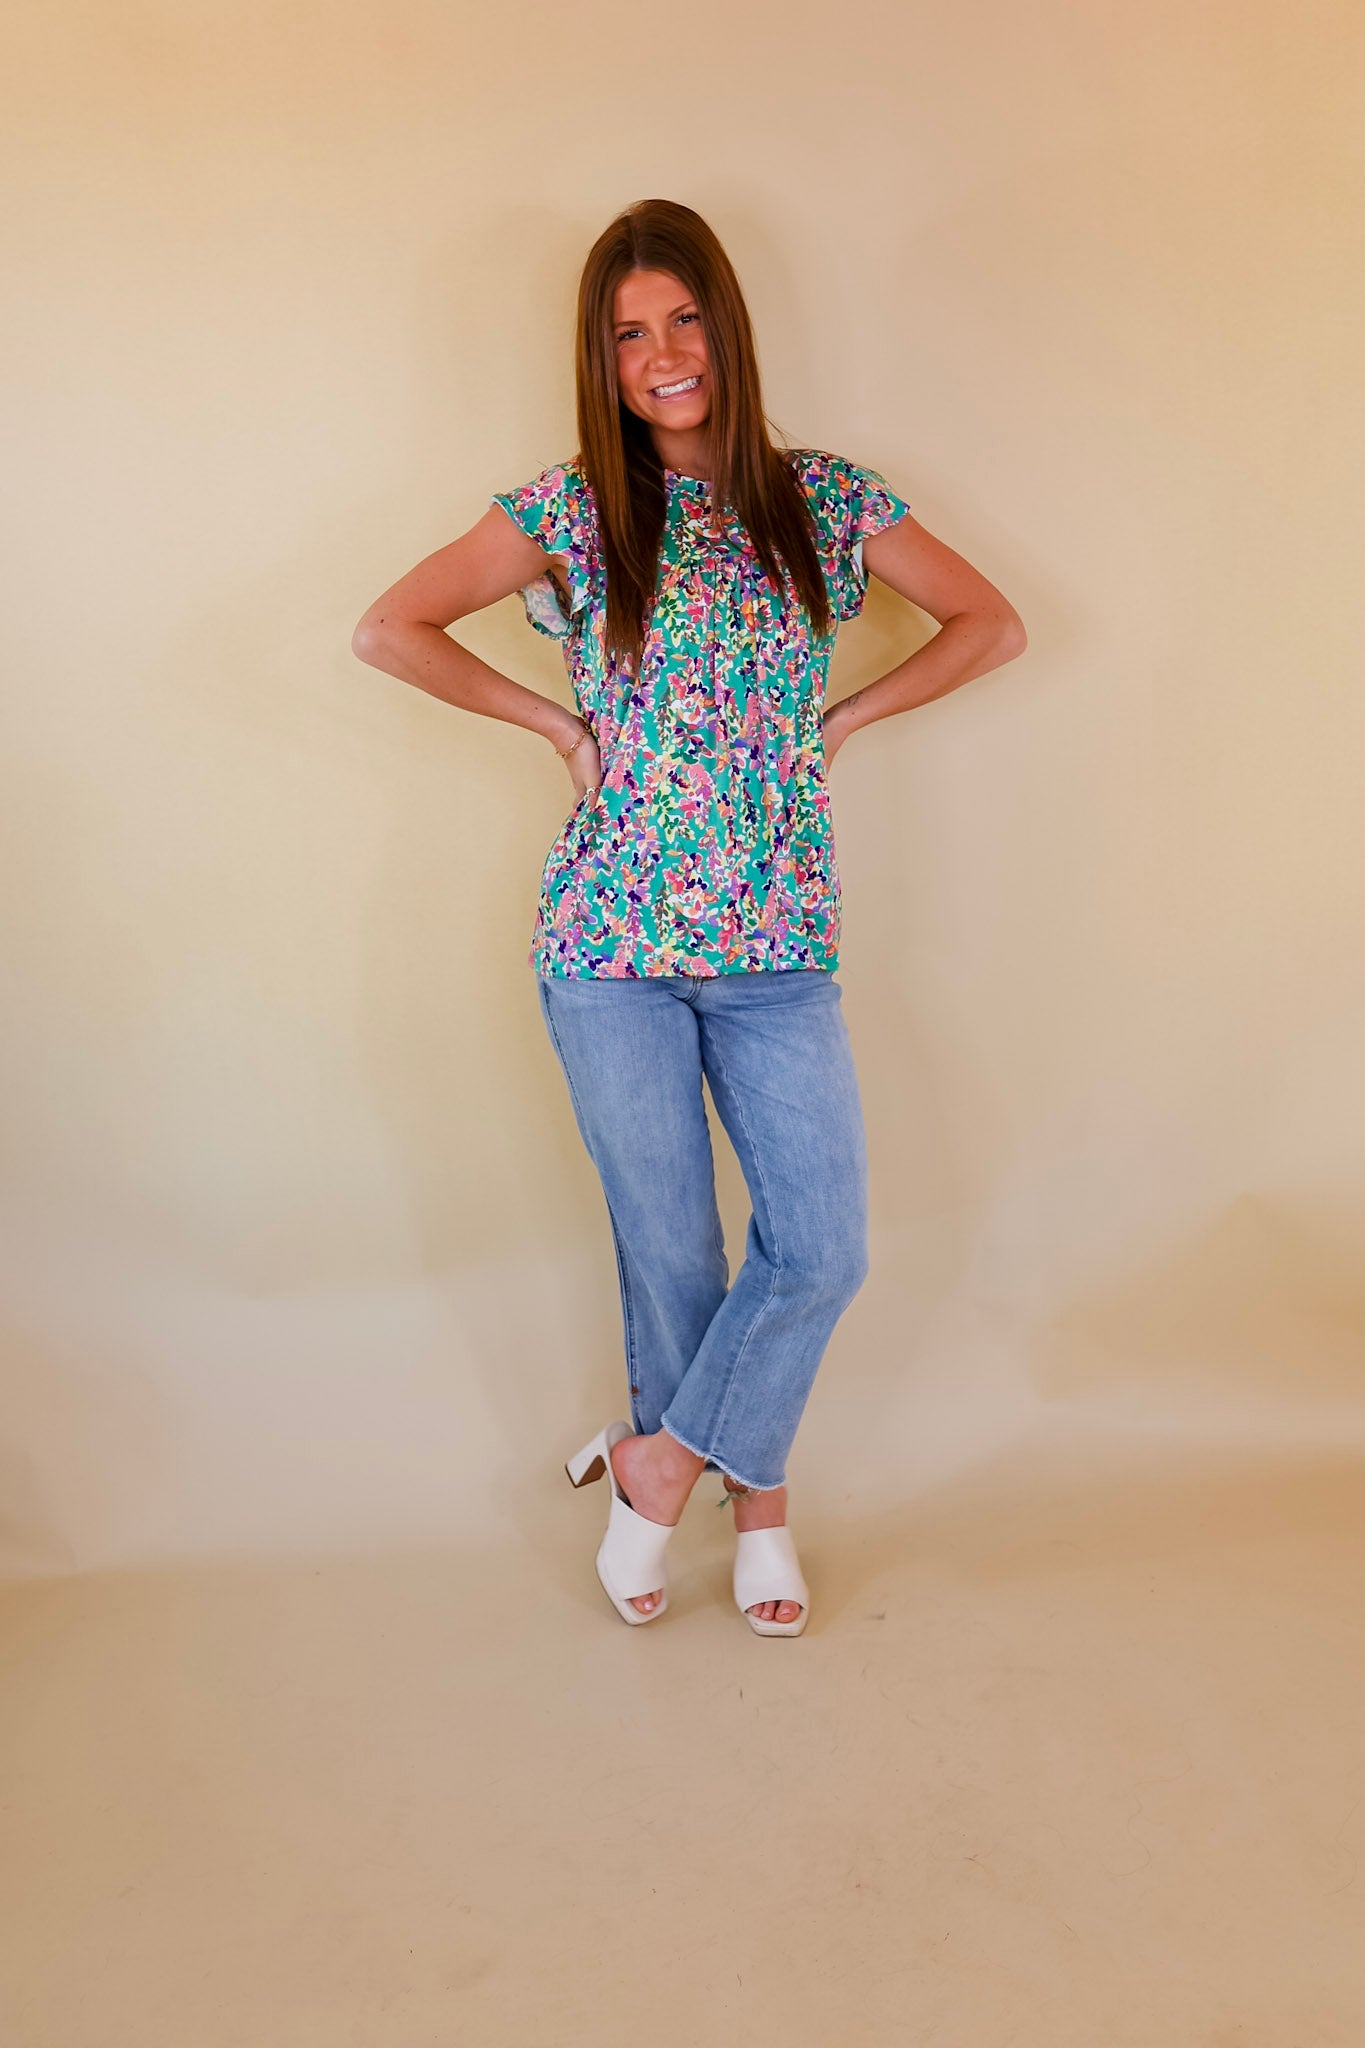 Garden Glory Floral Top with Ruffle Cap Sleeves in Green - Giddy Up Glamour Boutique